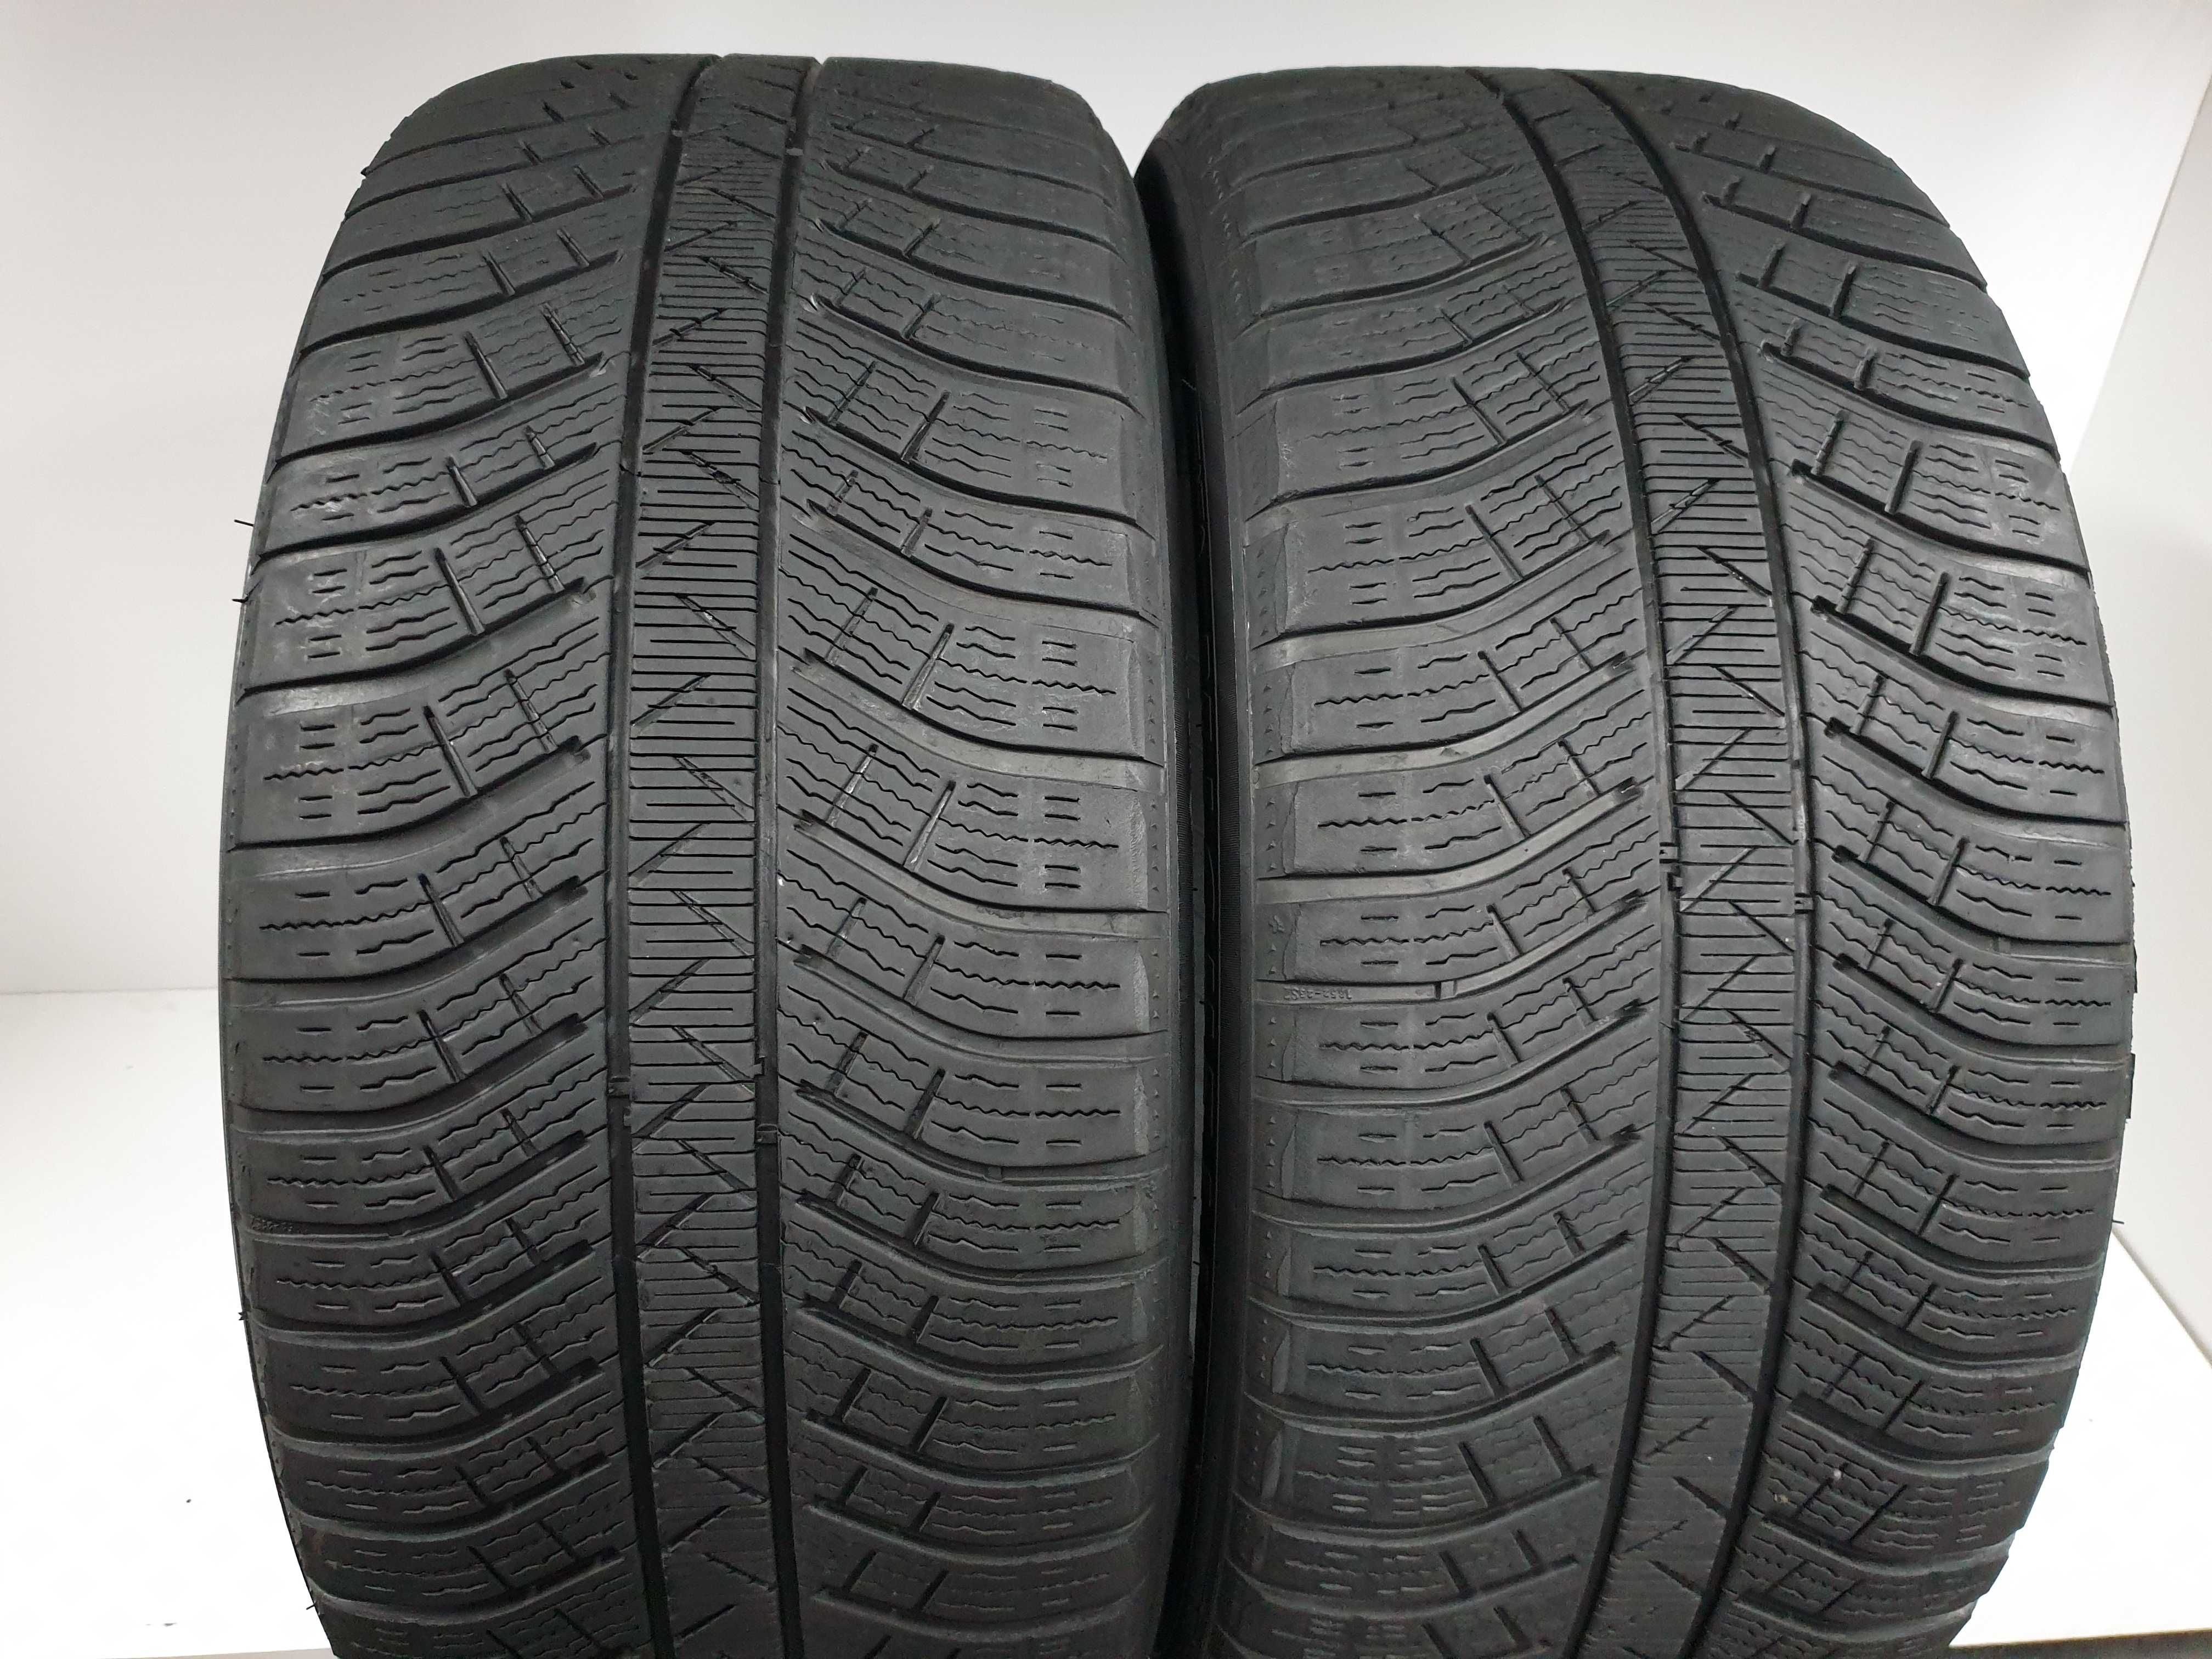 Anvelope Second Hand Michelin Iarna-265/45 R20 108V,in stoc R18/19/21